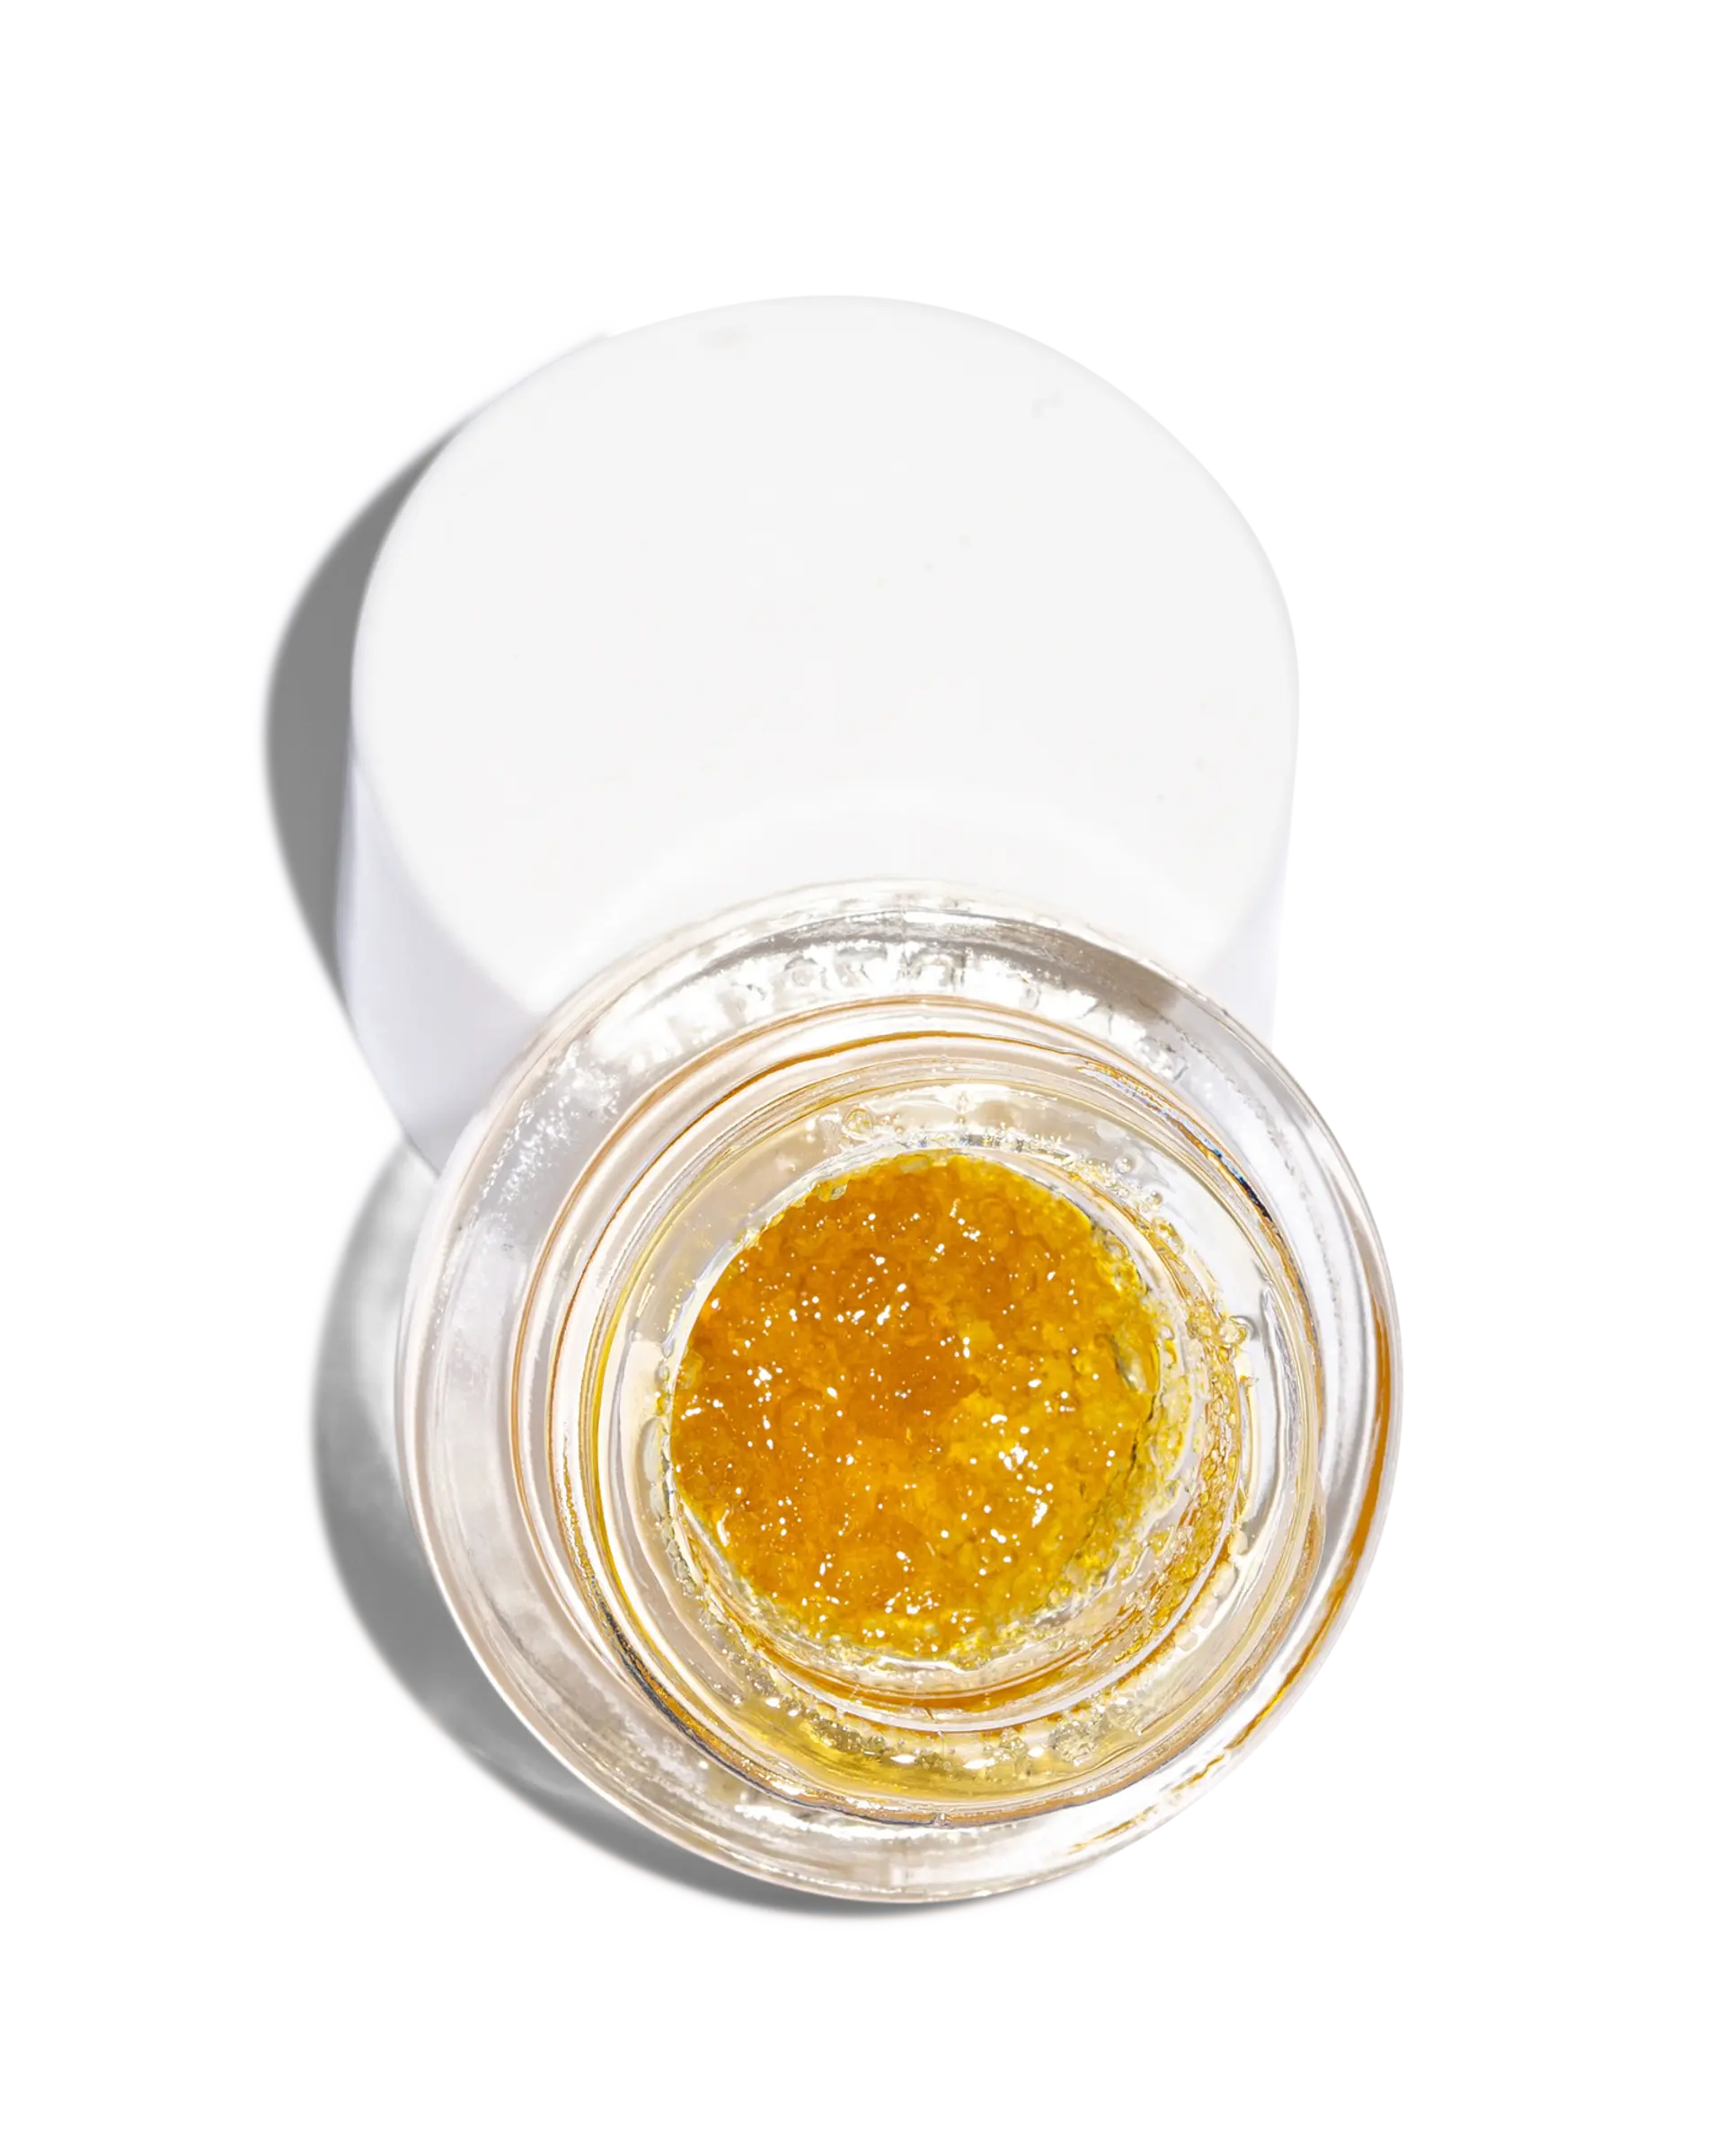 Strawberry Cough Live Resin 1g, 1 of 2